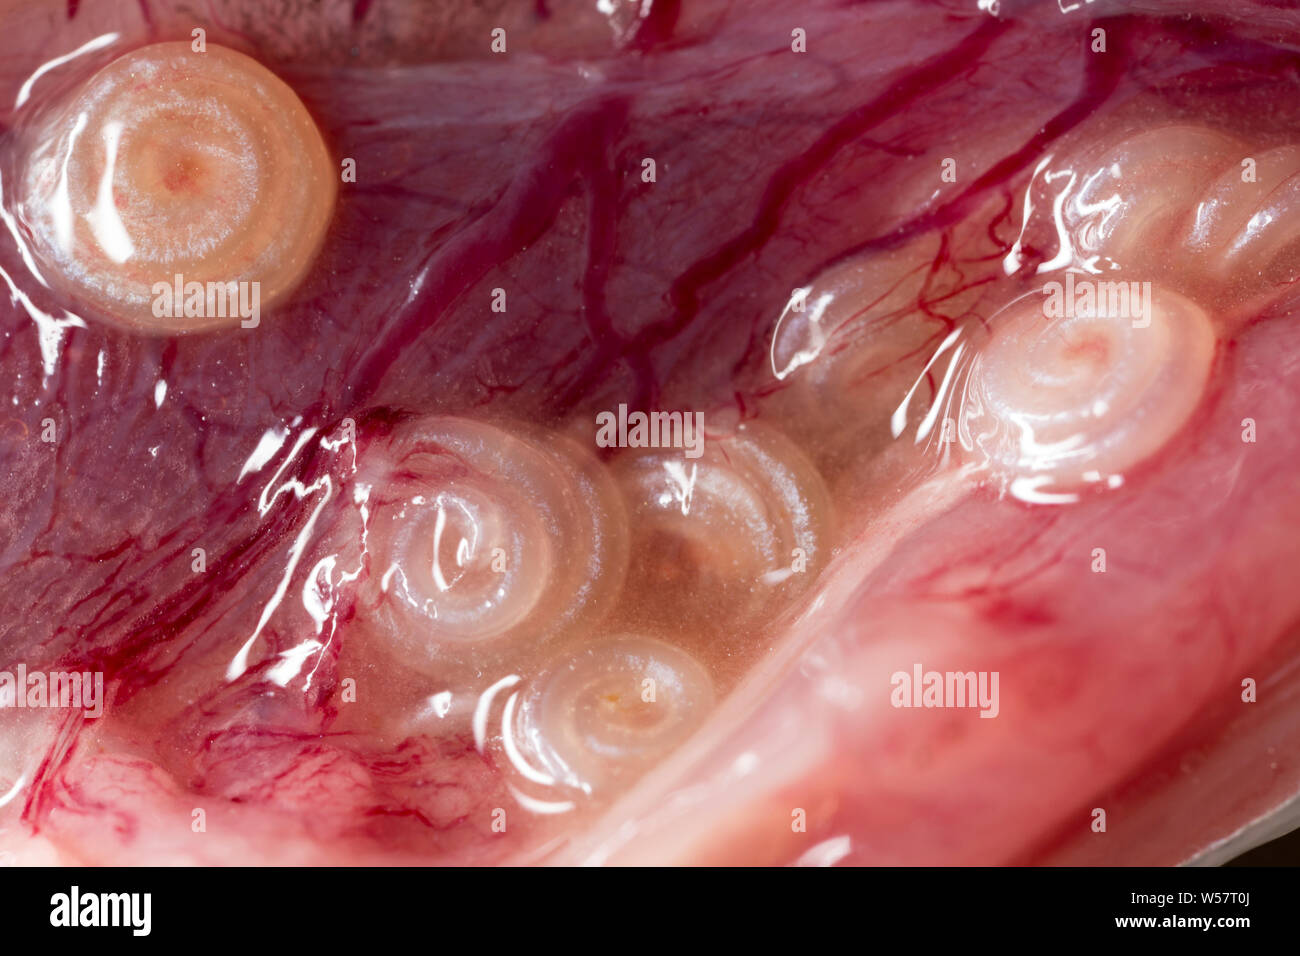 Parasitic nematode worms, or anisakis worms, in the abdominal cavity of a  mackerel, Scomber scombrus, that was caught on rod and line in the Eng Stock Photo